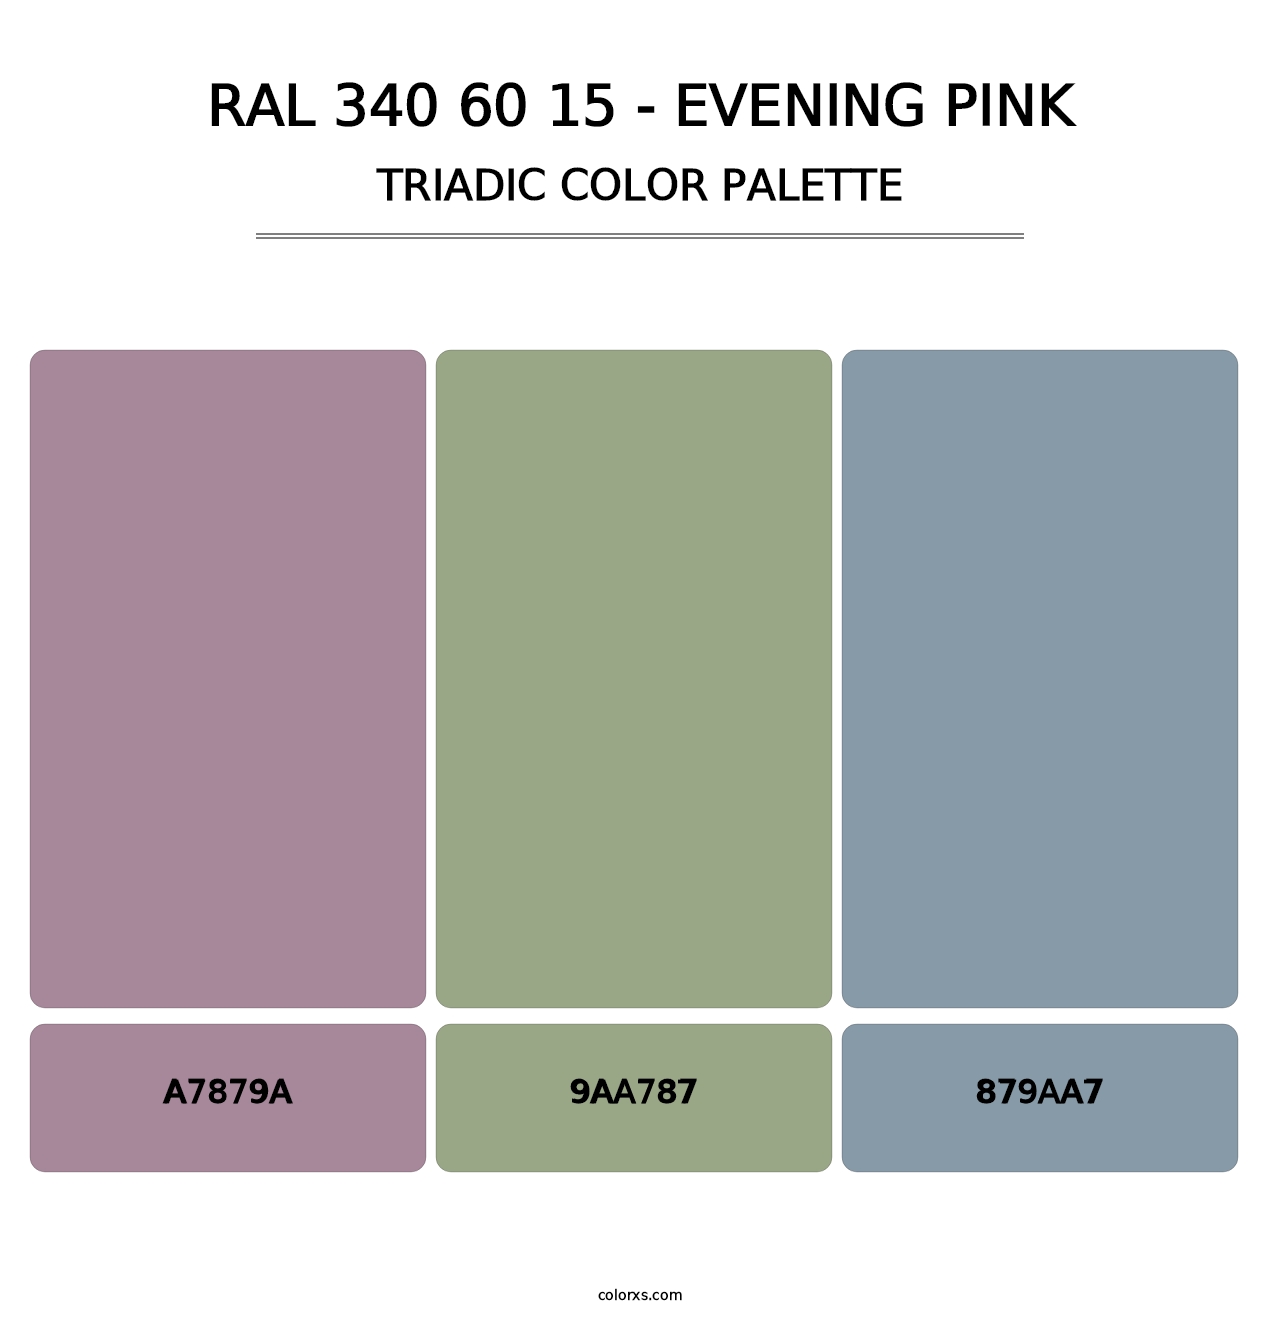 RAL 340 60 15 - Evening Pink - Triadic Color Palette